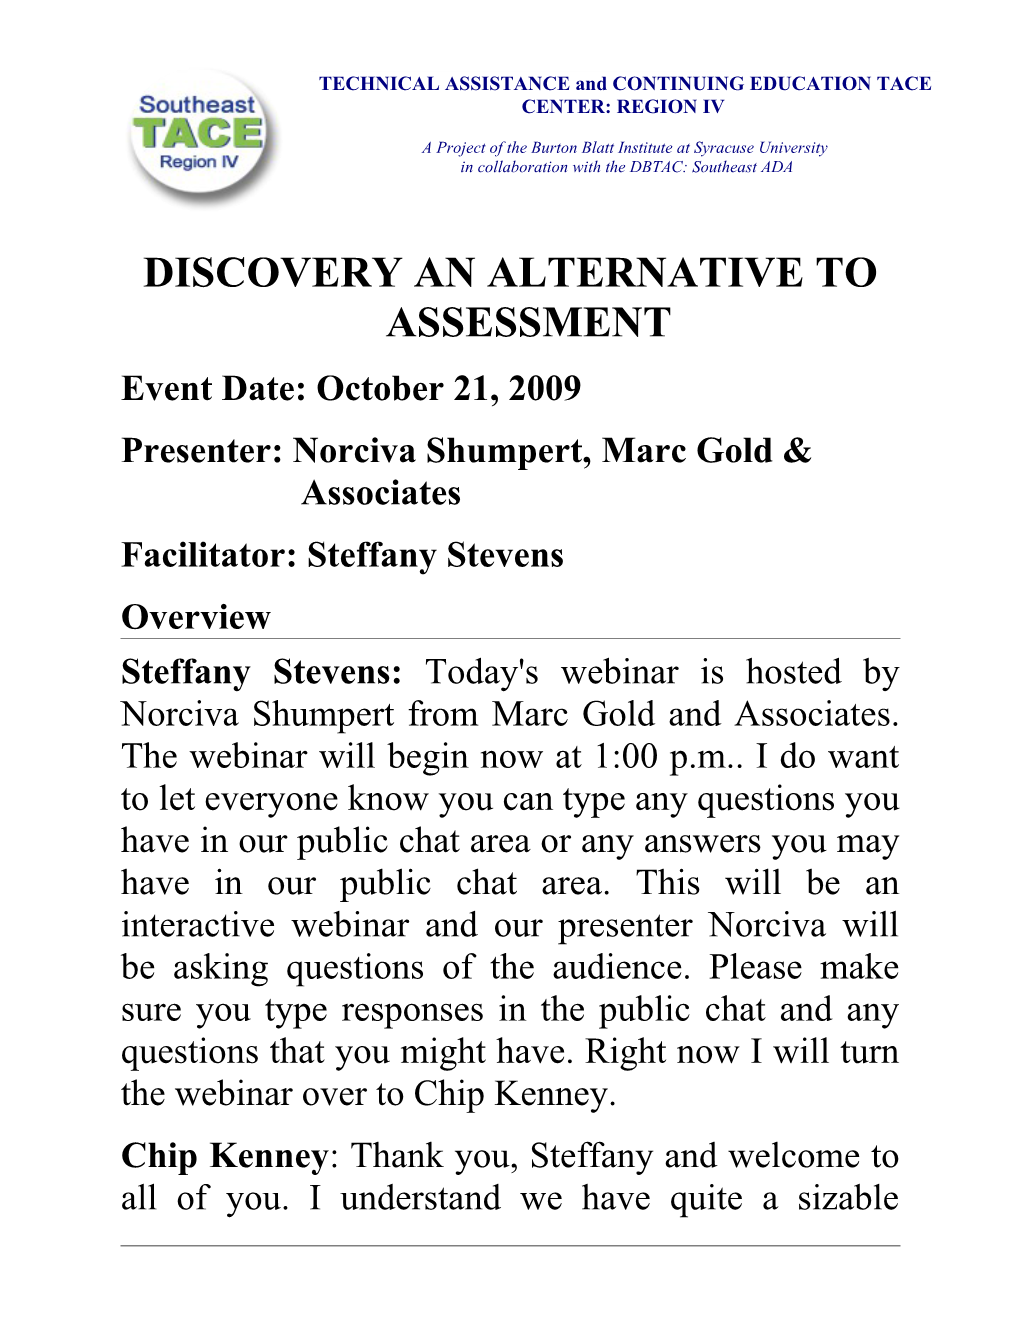 Discovery an Alternative to Assessment